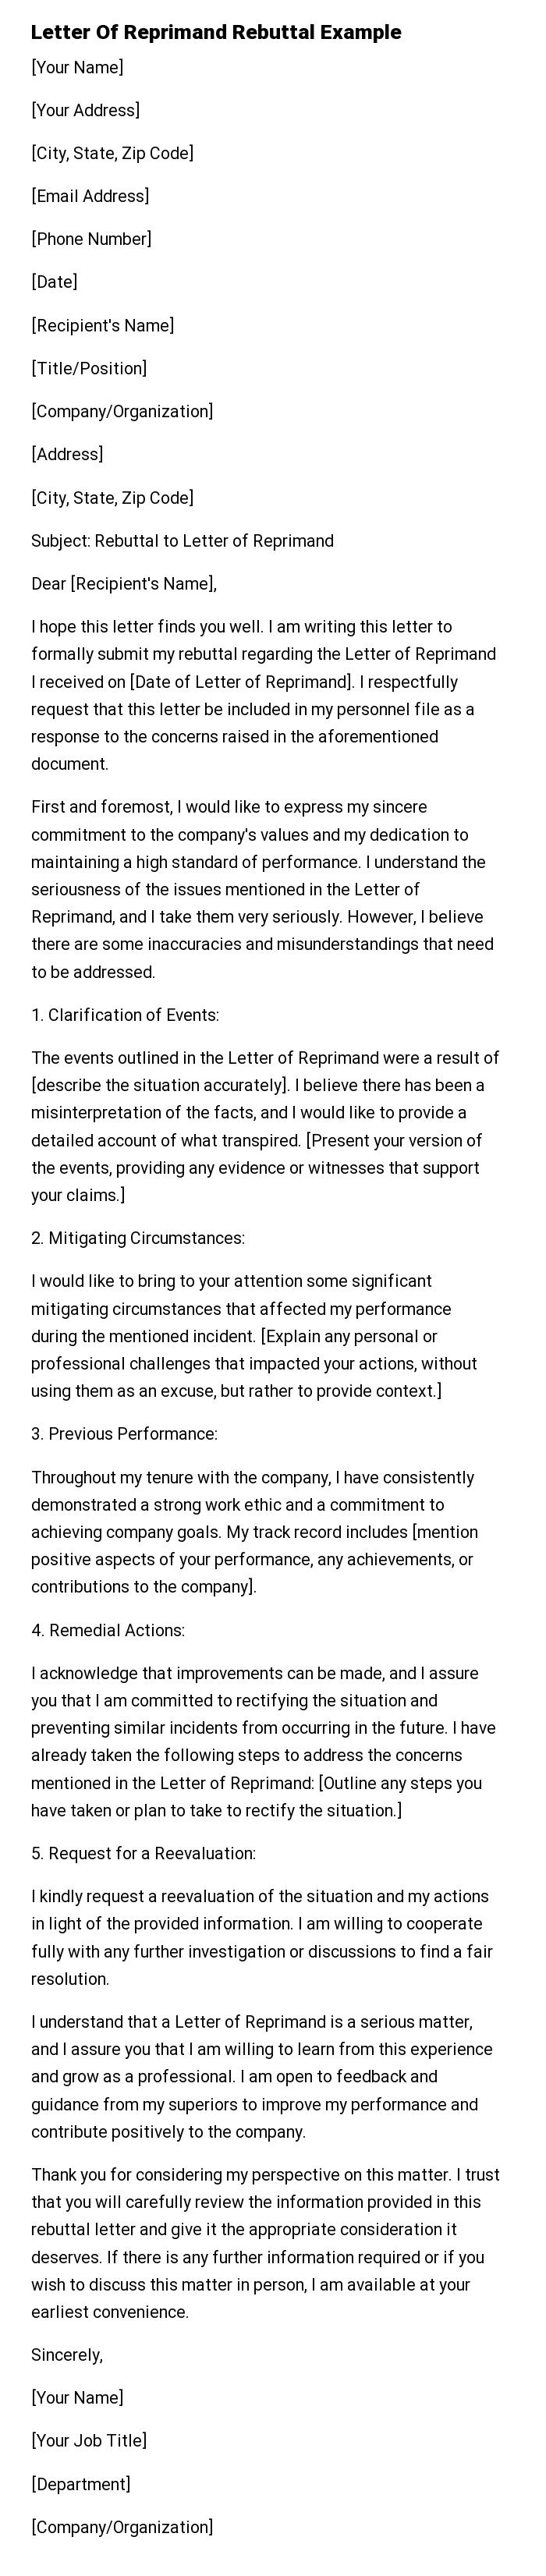 Letter Of Reprimand Rebuttal Example